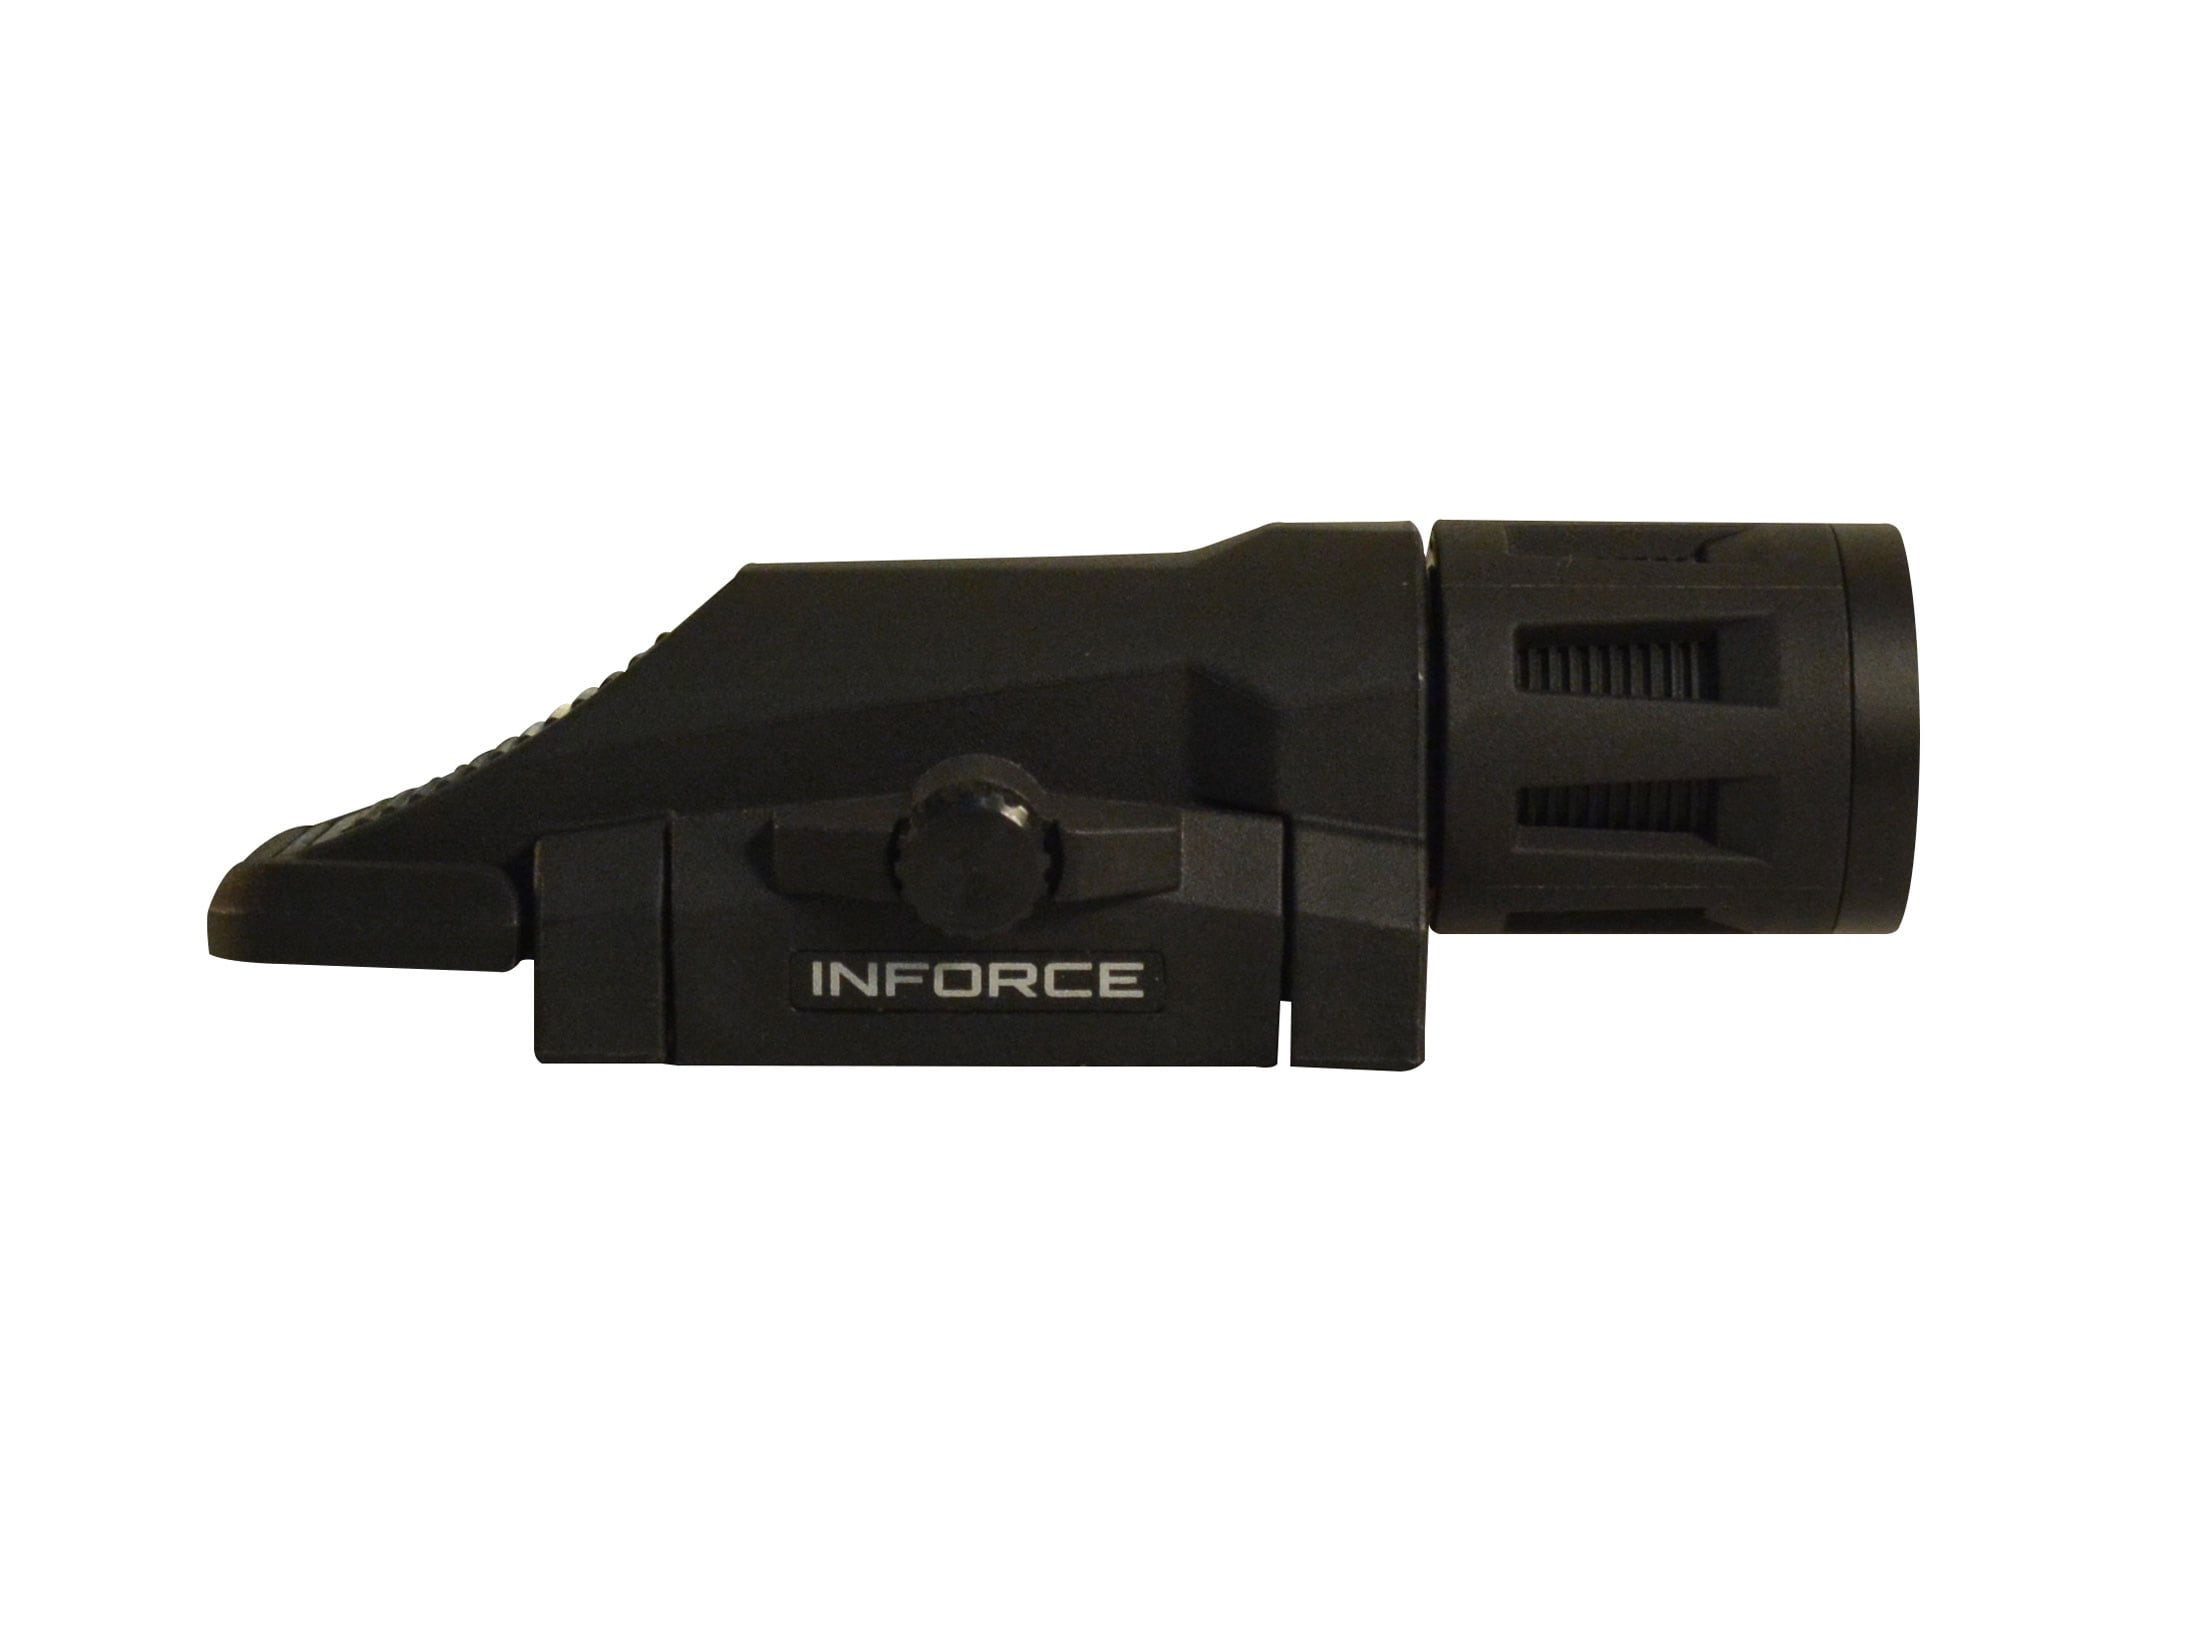 Inforce WML Gen2 Tactical Strobing Weaponlight LED with 1 CR123A Battery Fits Picatinny Rails Fiber Composite For Sale